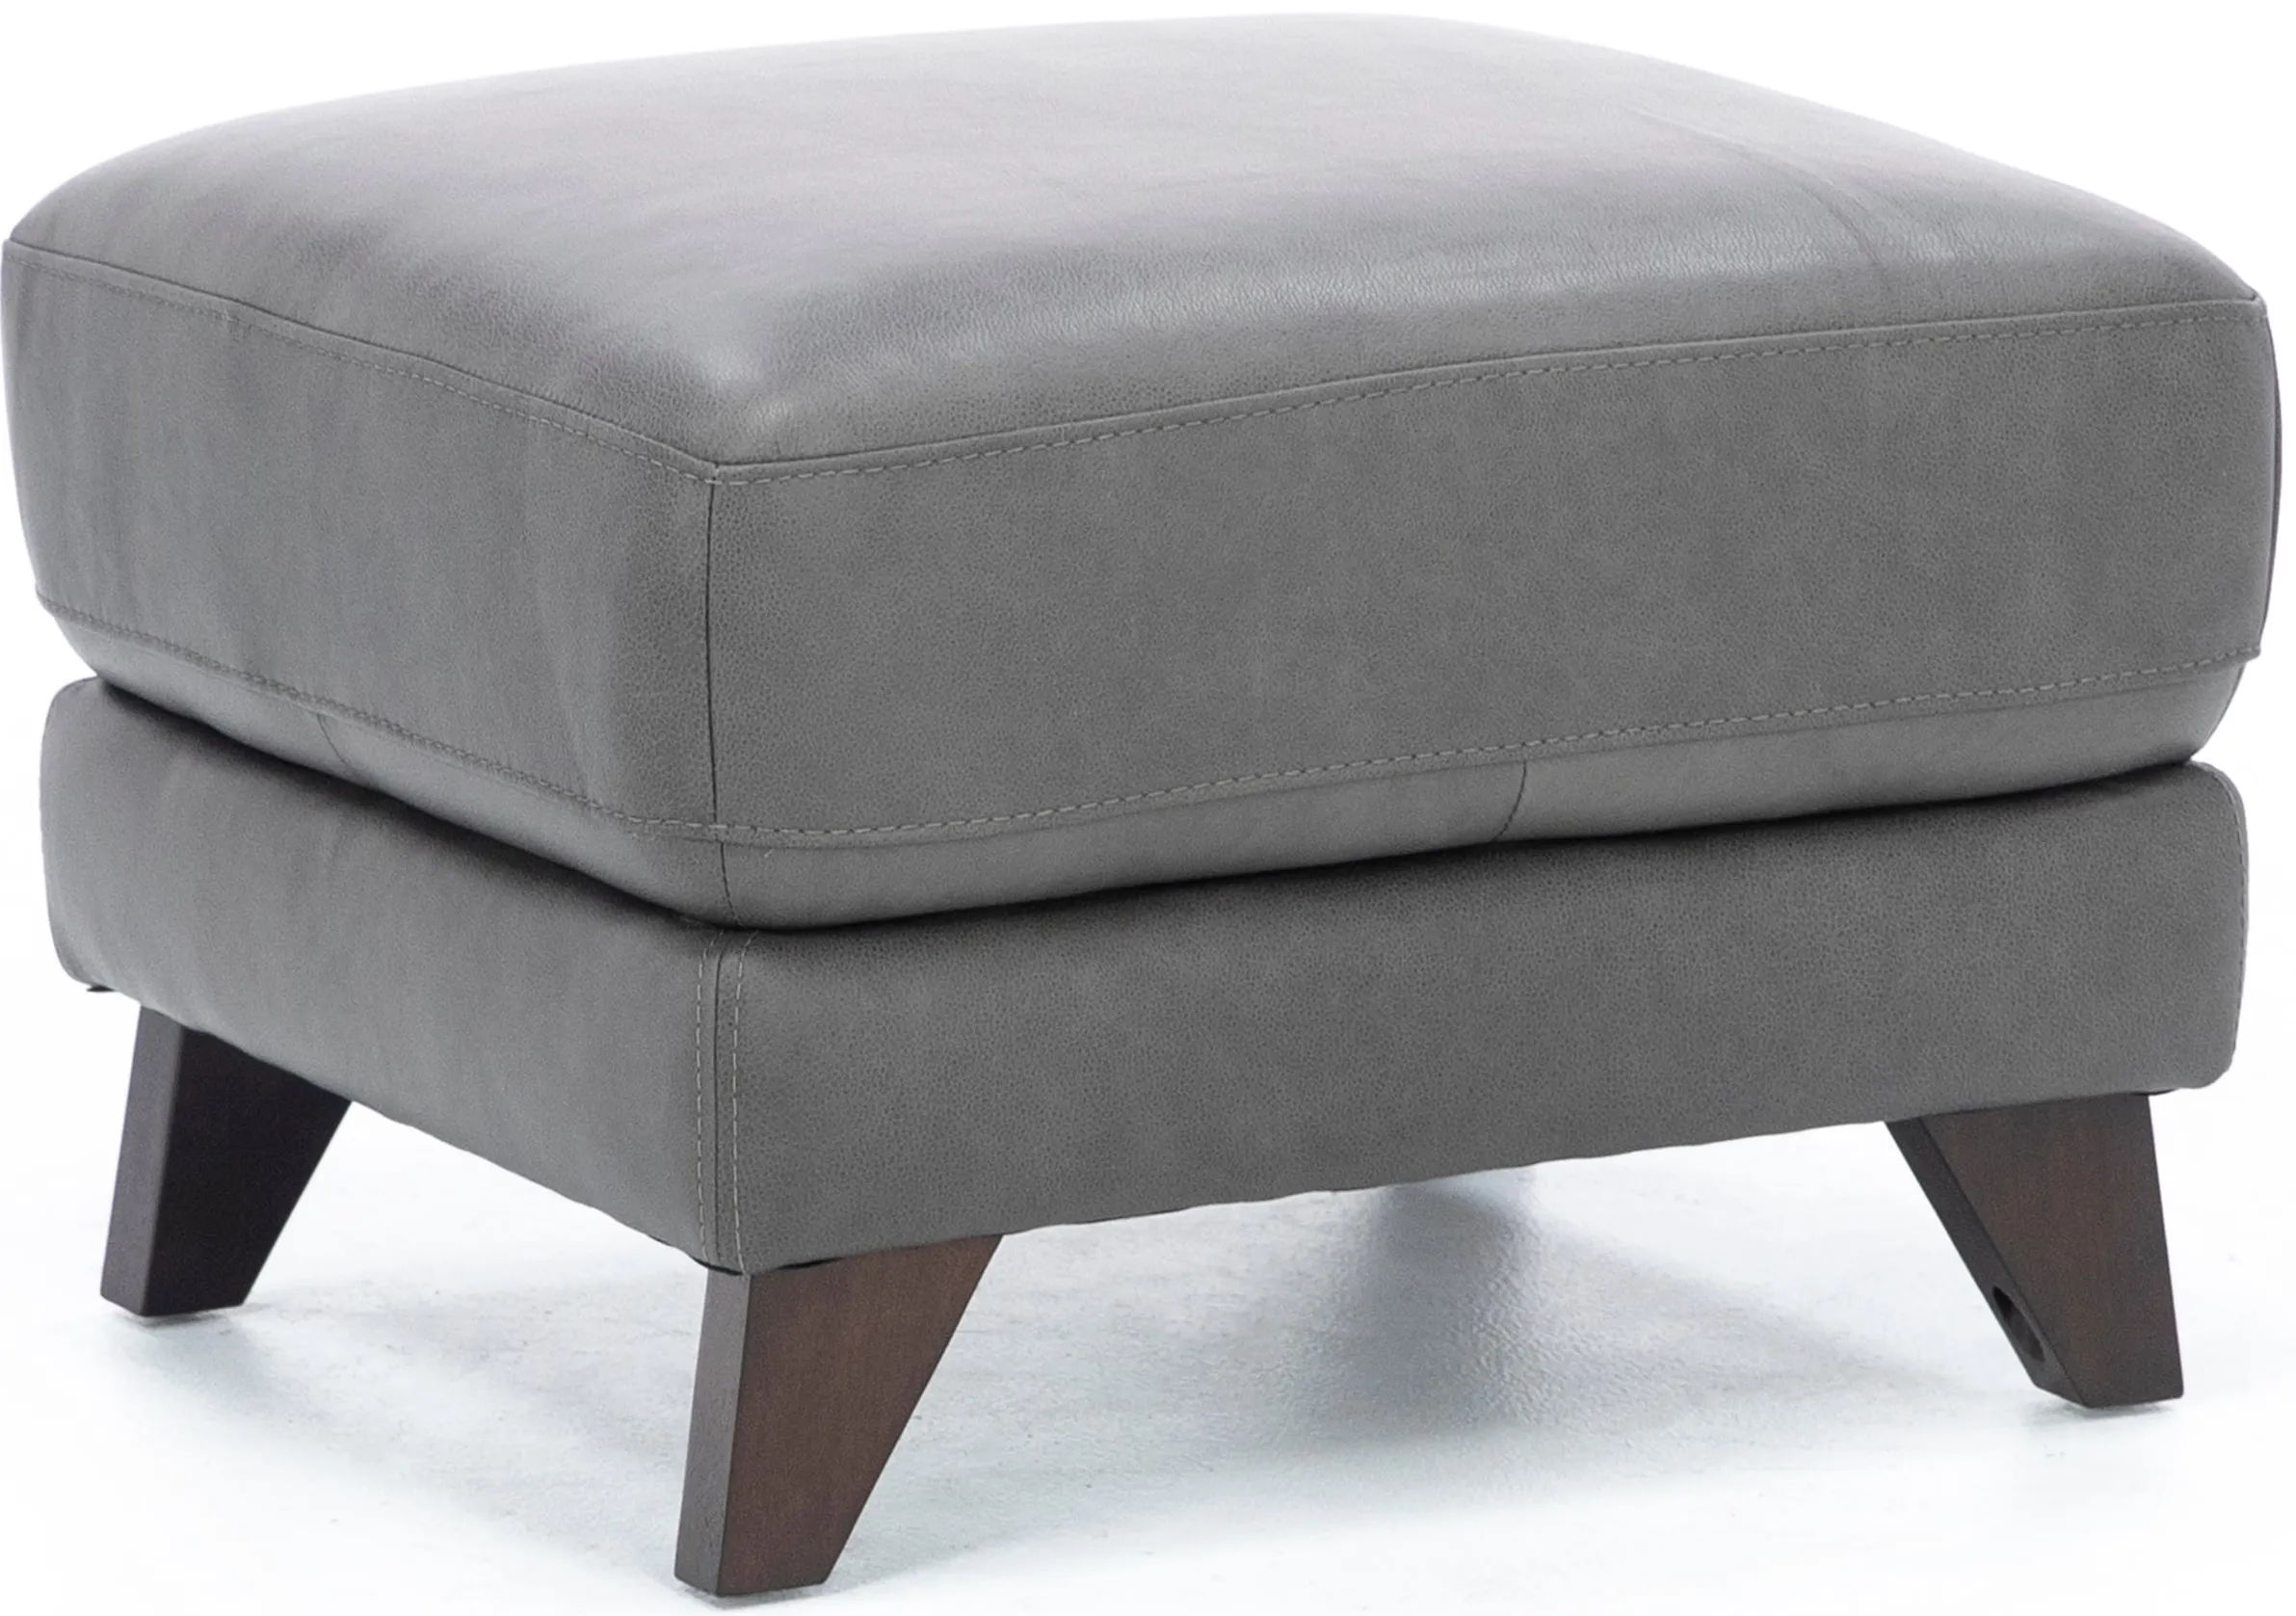 Martini Leather Ottoman in Charcoal